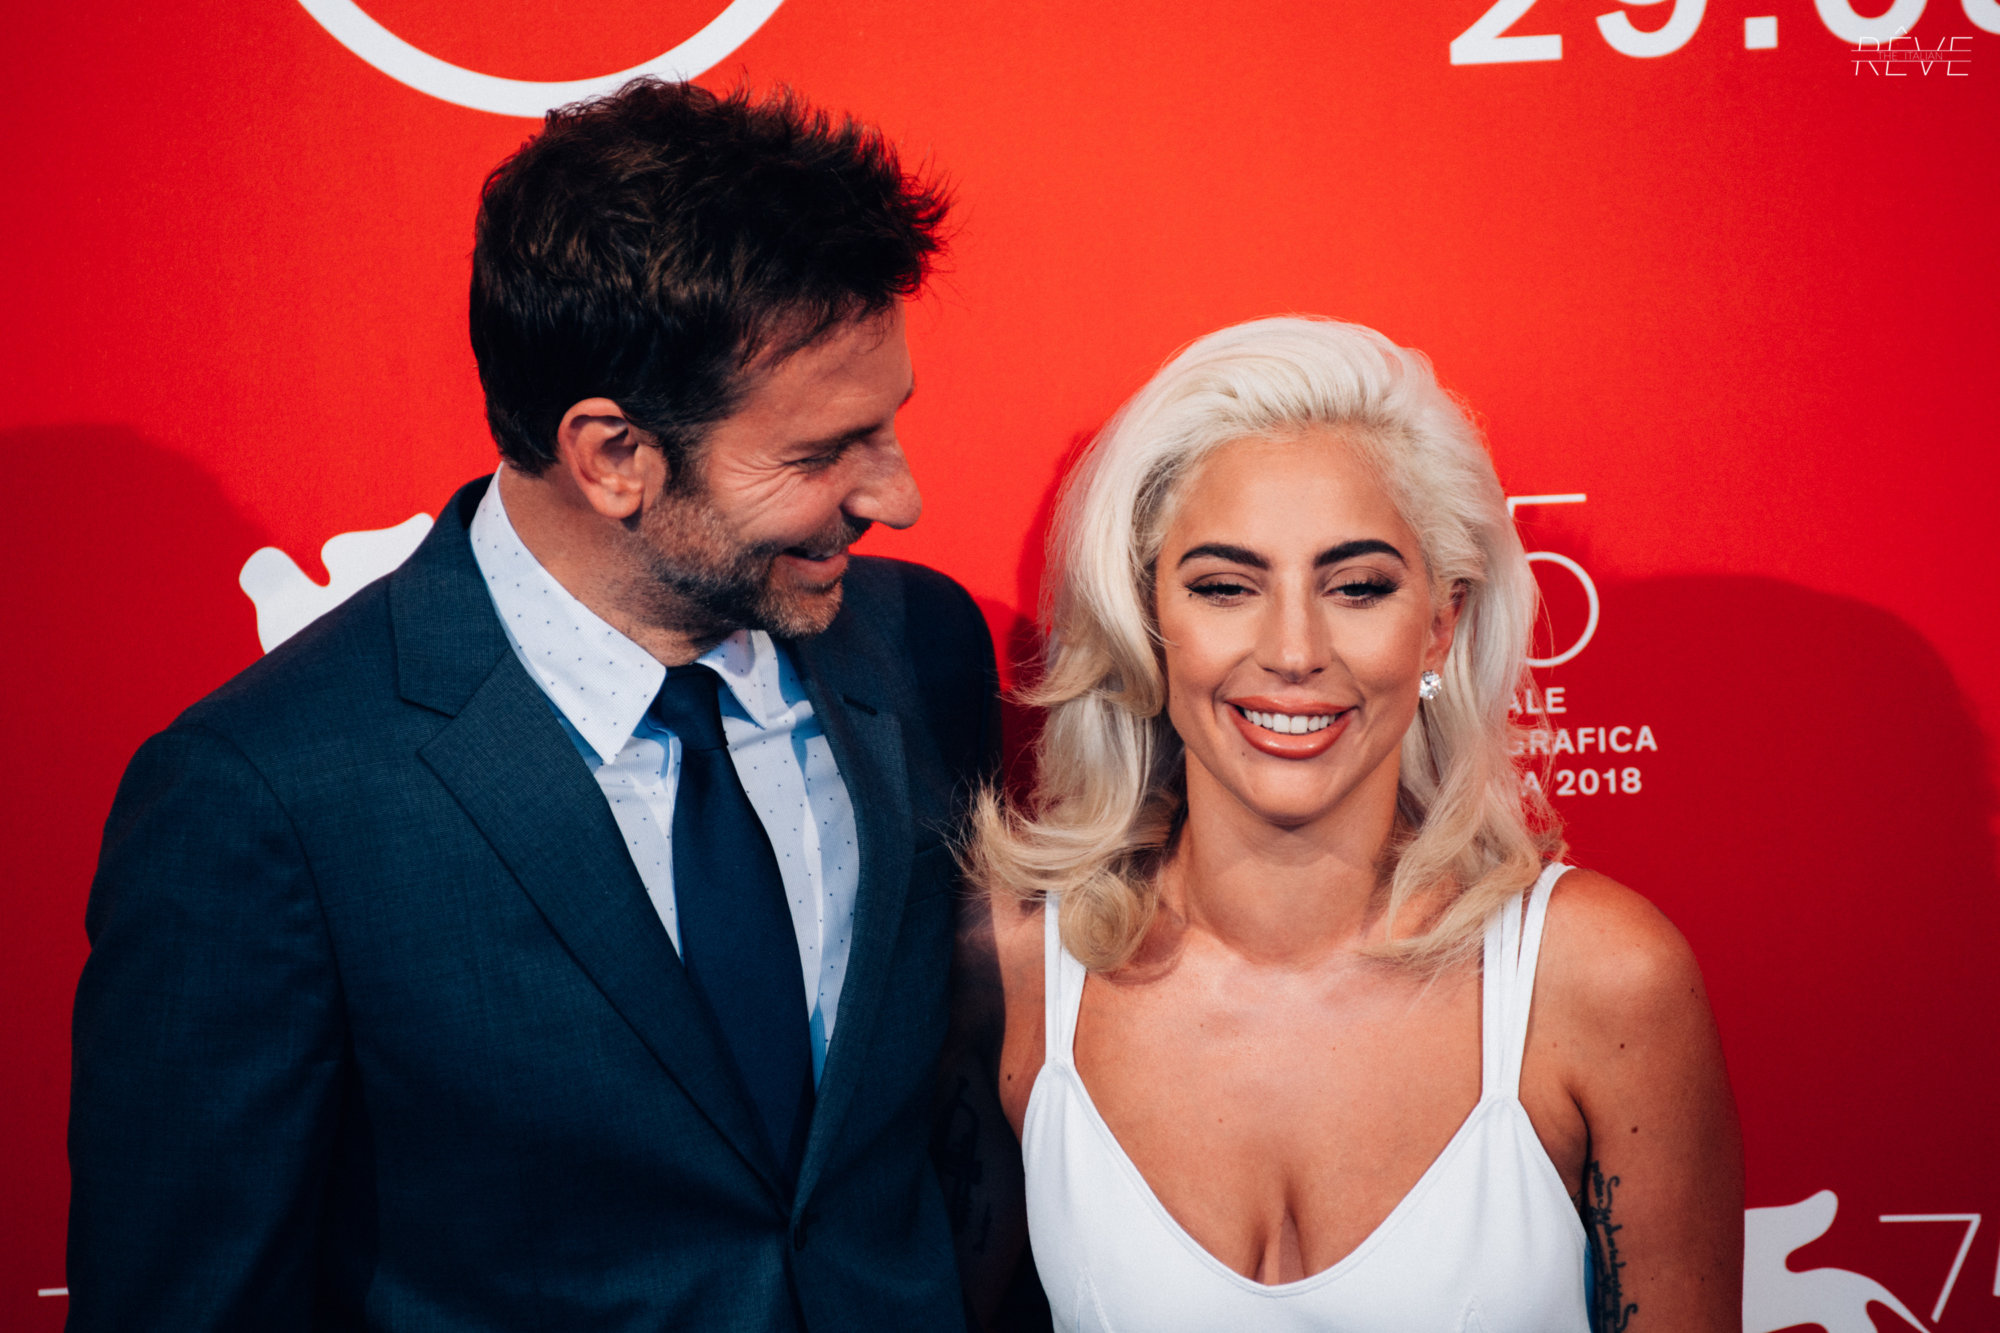 Review: 'A Star Is Born' Starring Lady Gaga and Bradley Cooper